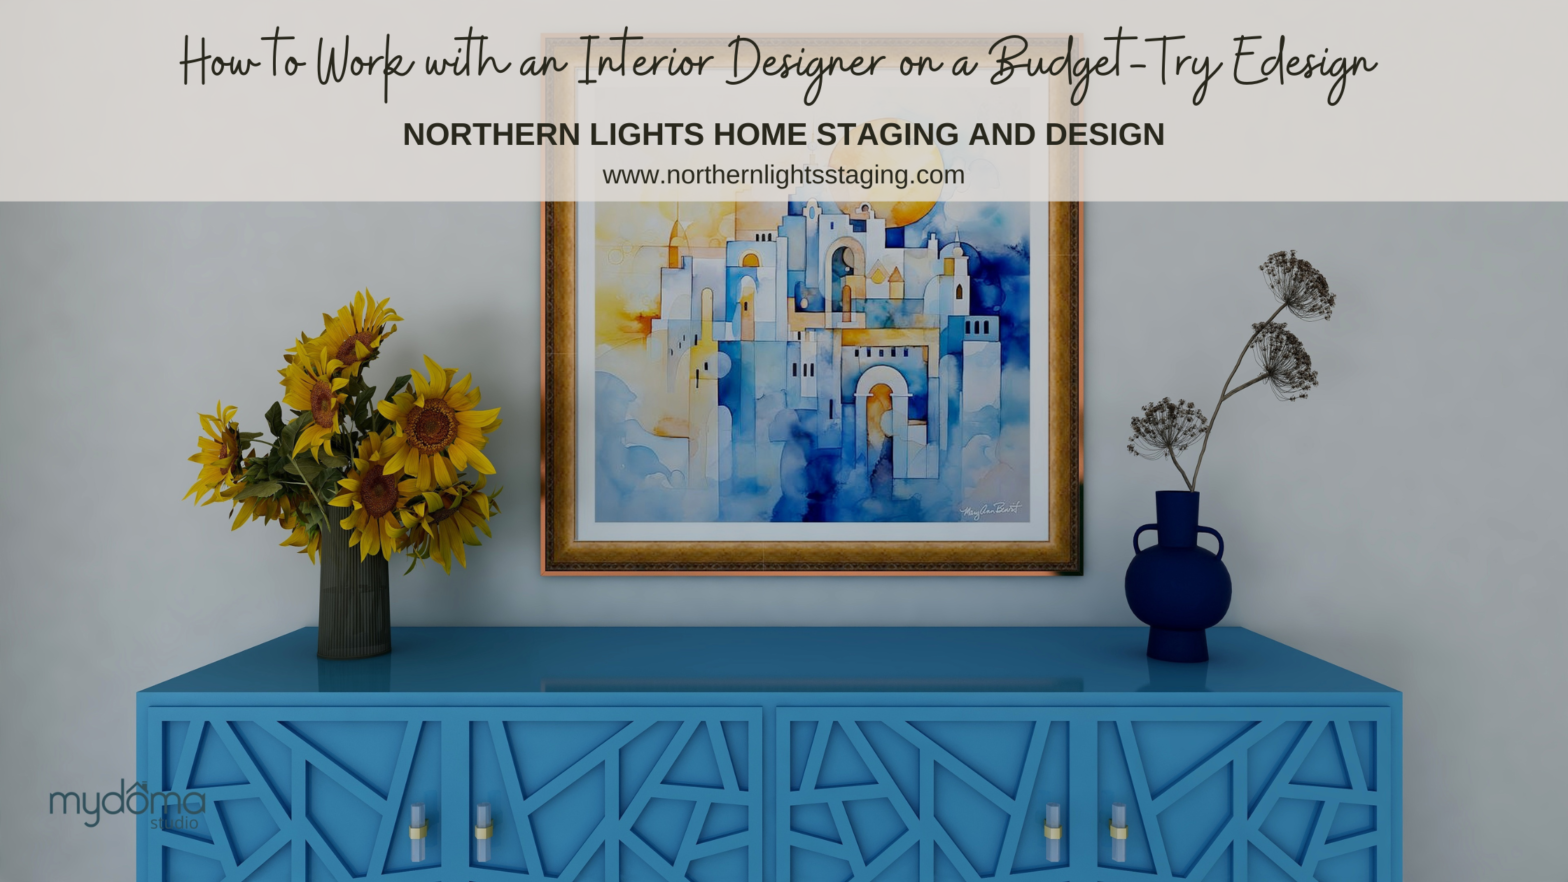 How can I work with an Interior Designer on my budget? Rey Edesign.